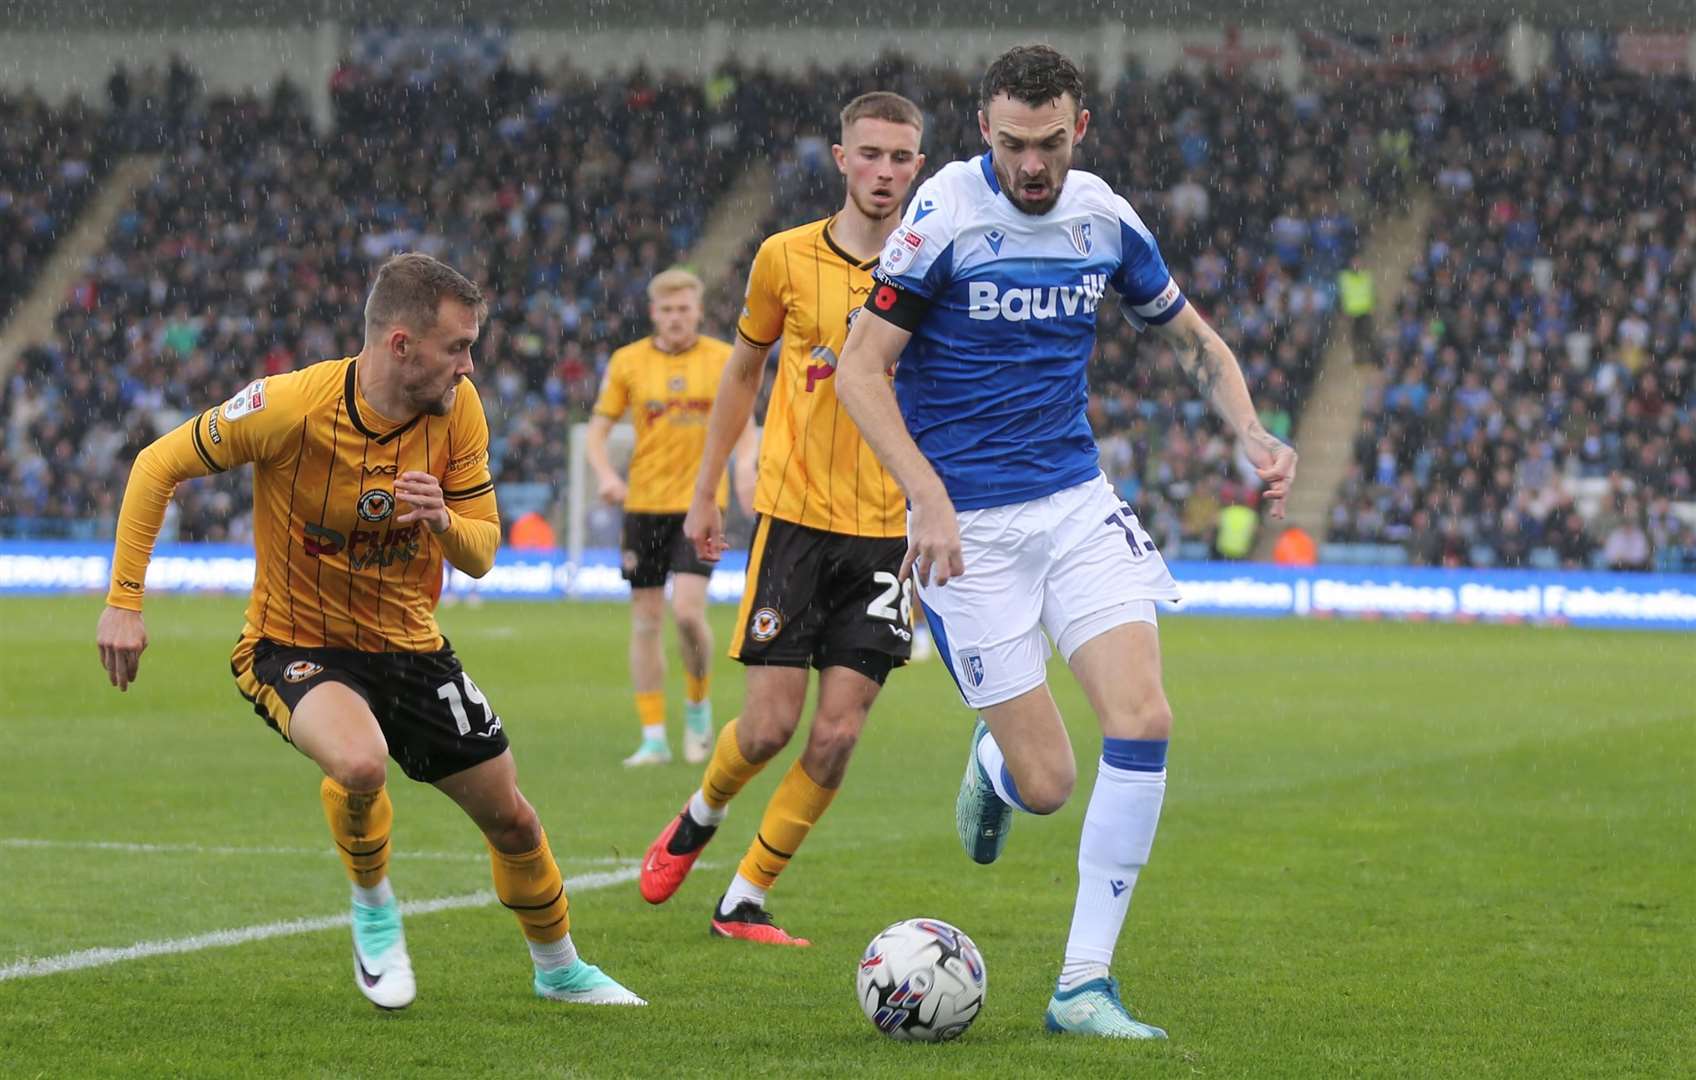 Scott Malone takes on his man as the Gills play Newport Picture: @Julian_KPI